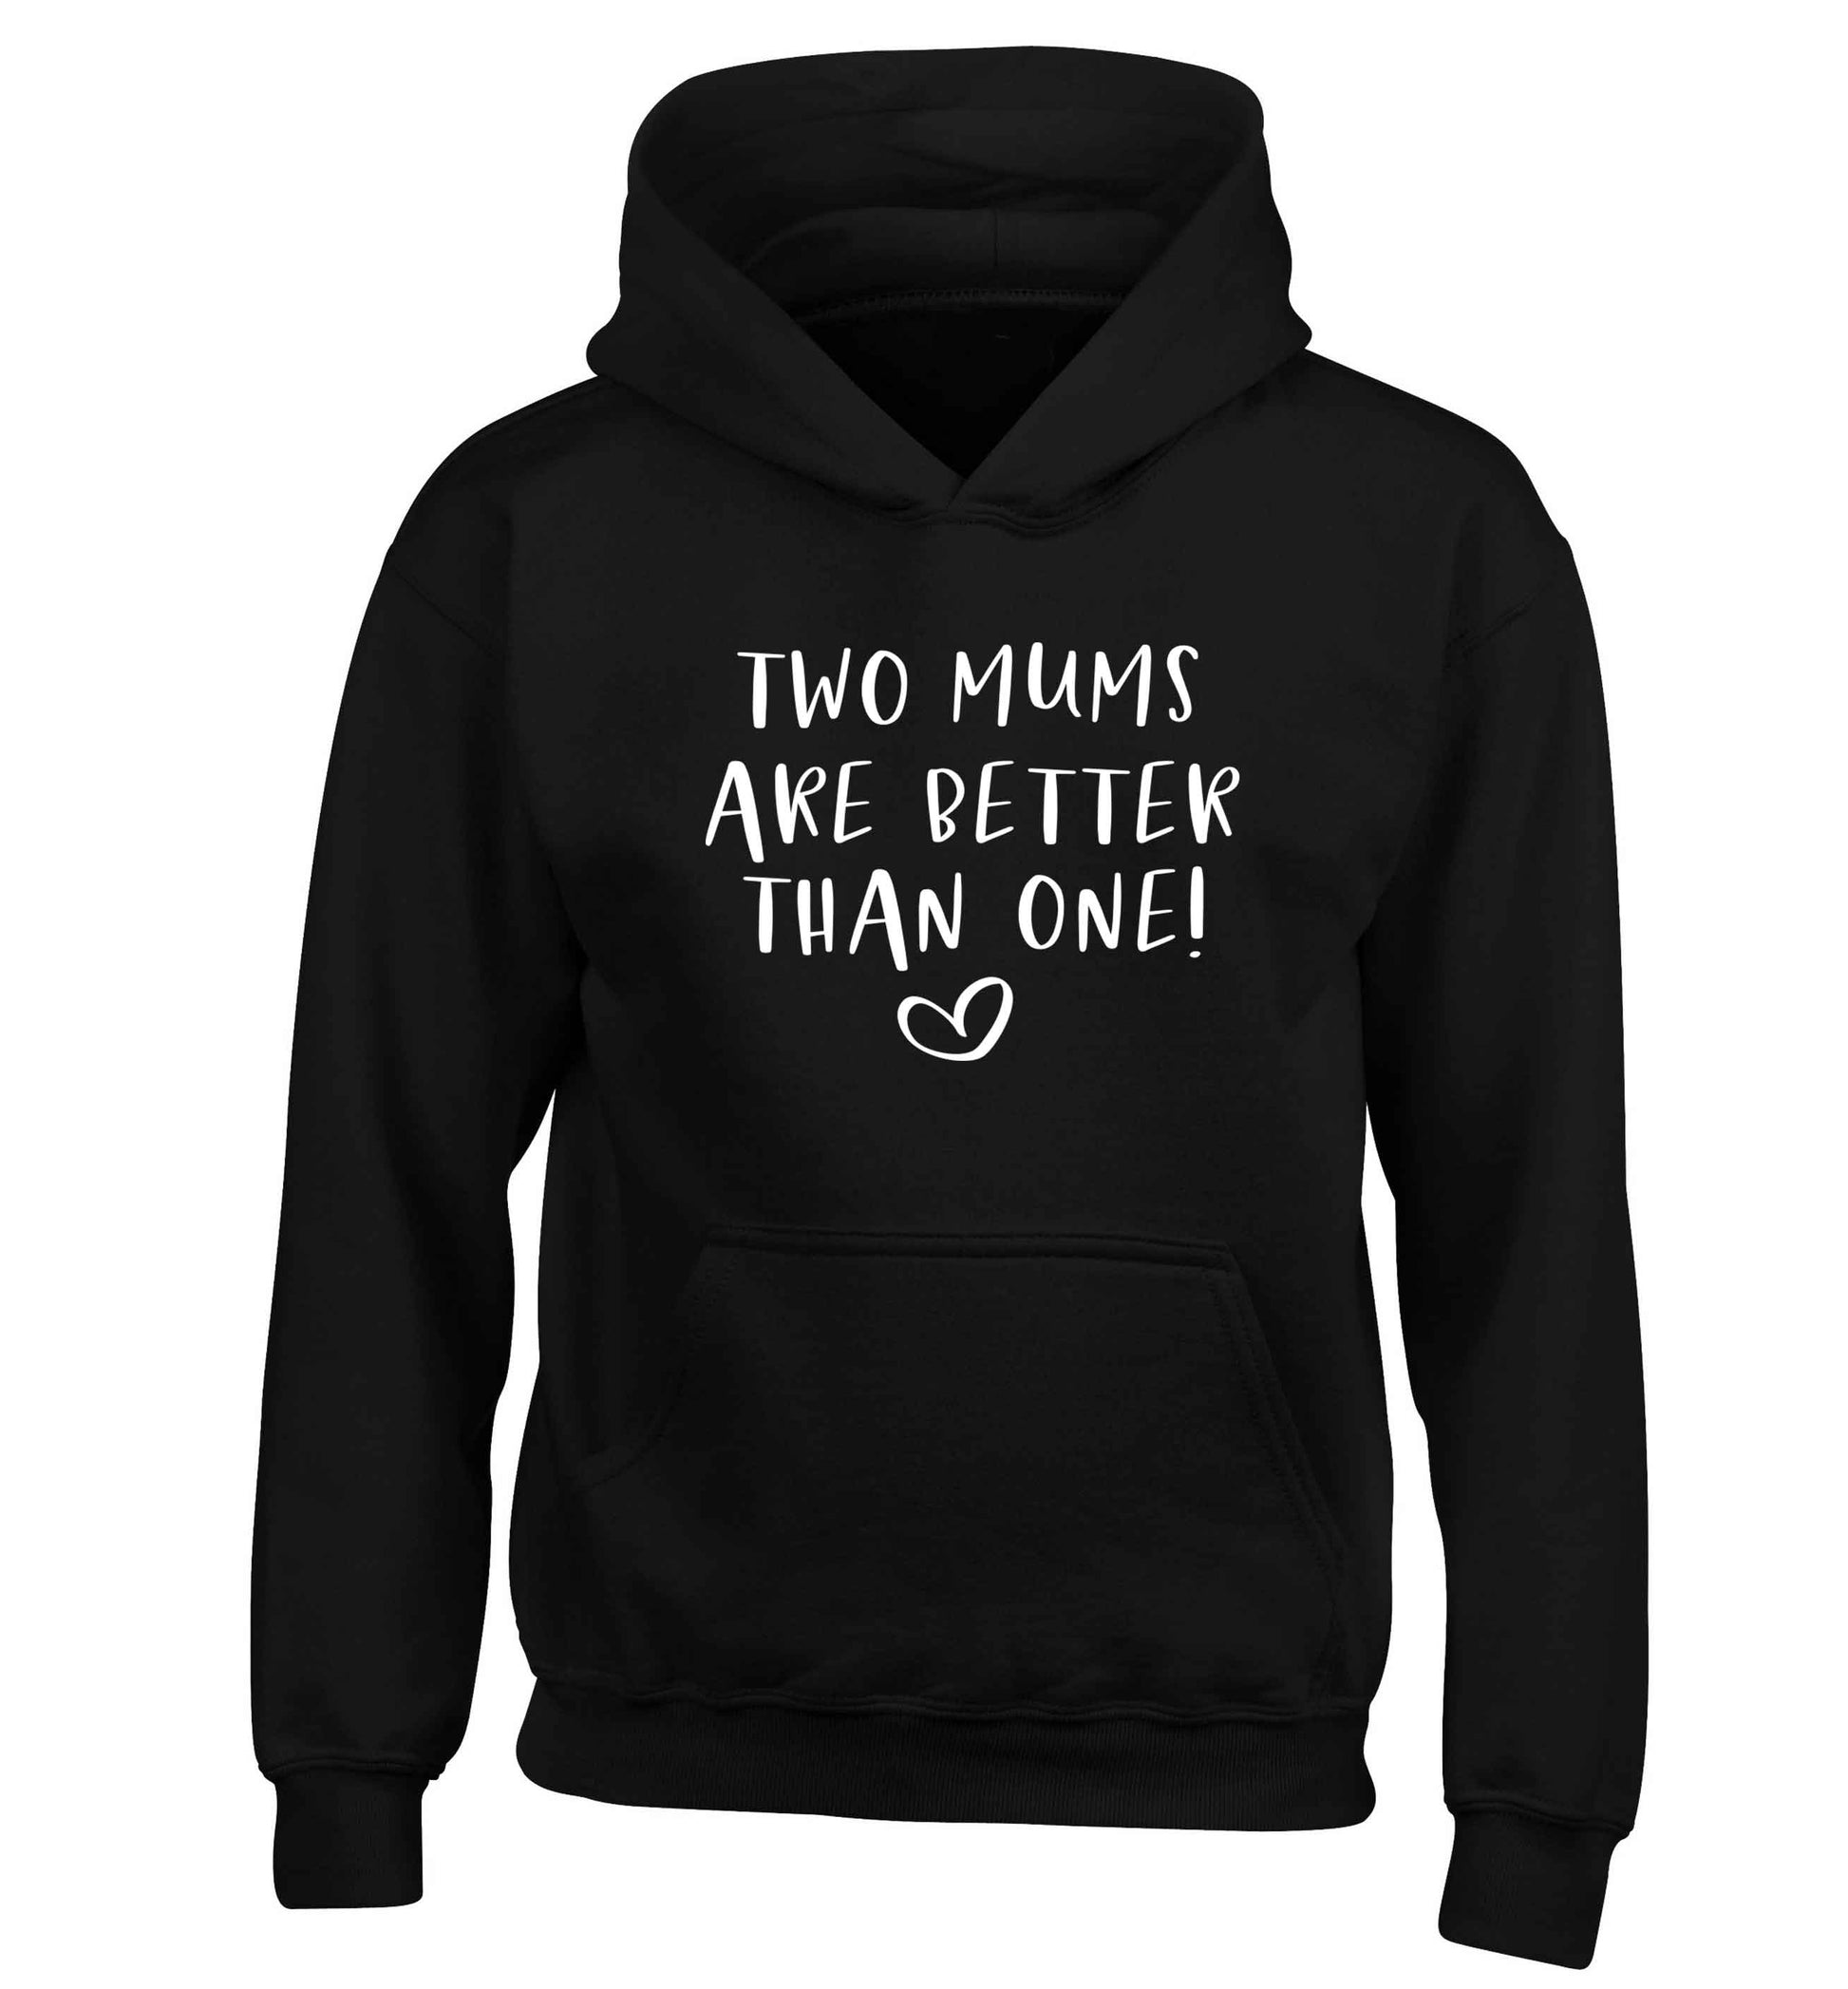 Two mums are better than one children's black hoodie 12-13 Years